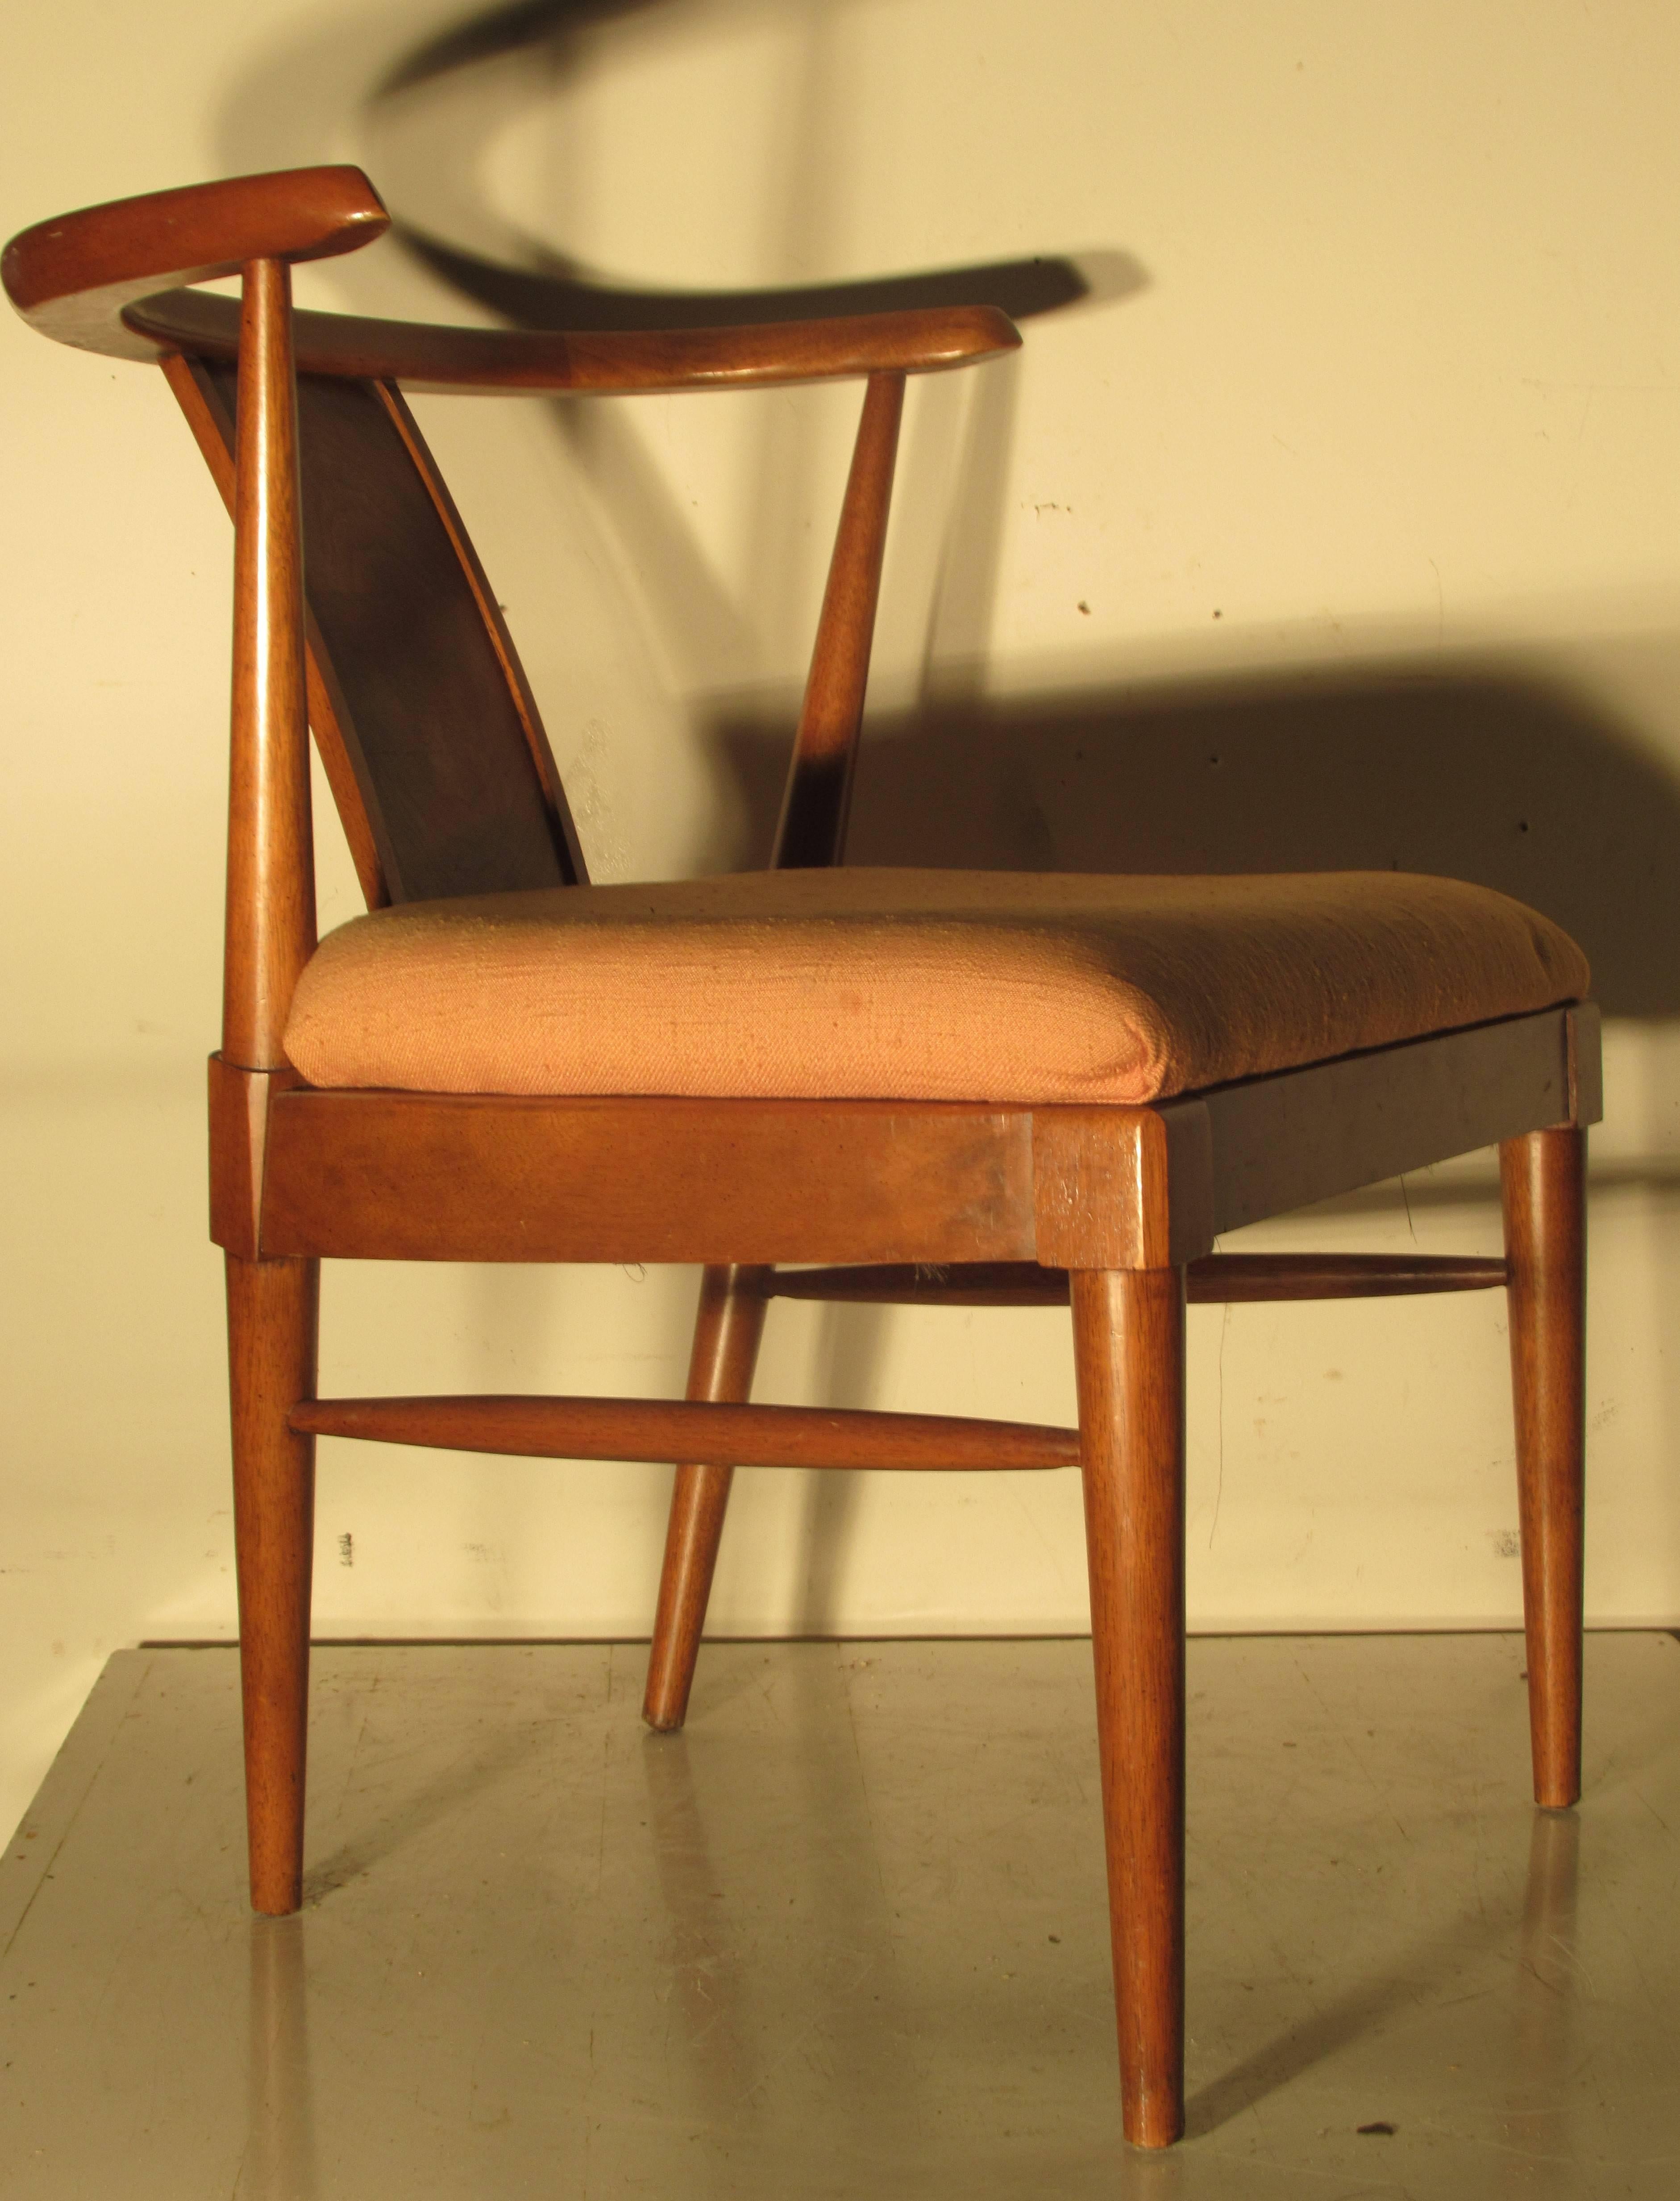 Pair of mid-20th century modern wishbone style occasional chairs with an angular sculptural form and a beautifully figured wood grain. Good quality, very elegant in the style of Tomlinson  / John Widdicomb.